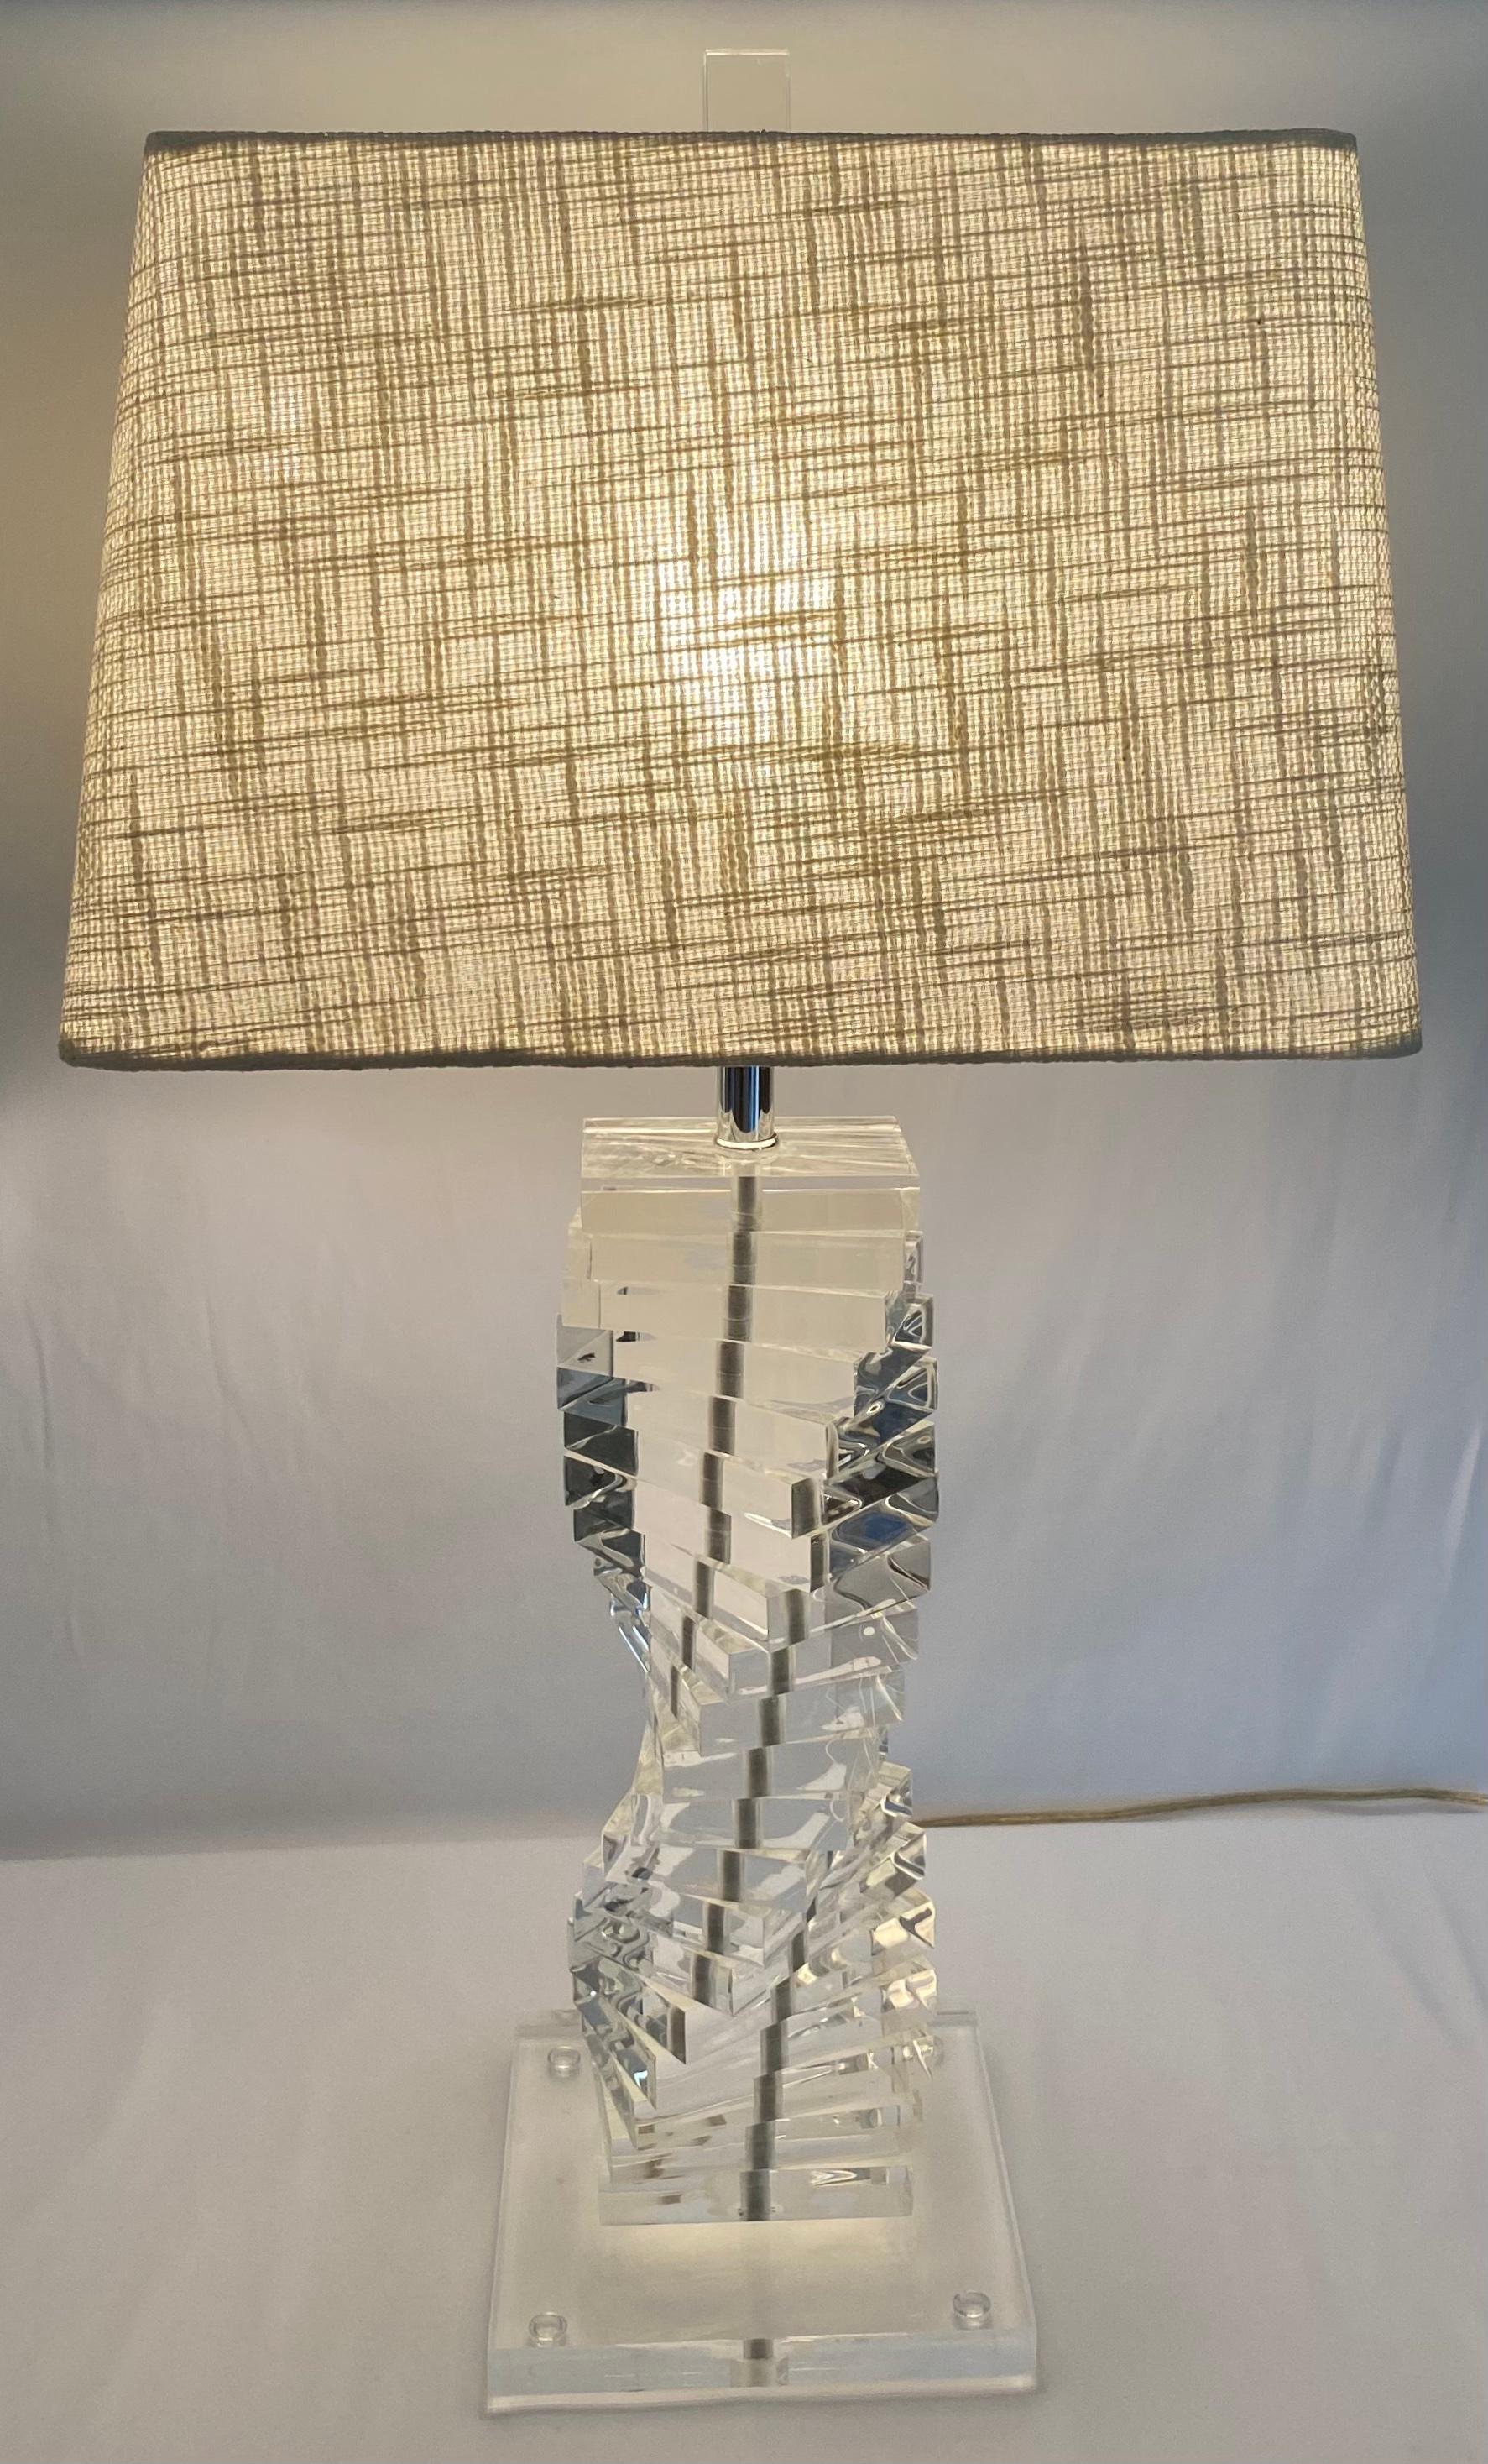 Superb pair of Lucite table lamps with a spiral stacked staircase design of clear Lucite by Karl Springer. 
Stylish and versatile. 

Measures: Depth 9 in. x Width 15 in. x Height 29.75 in.
These lucite table lamps would enhance any contemporary or